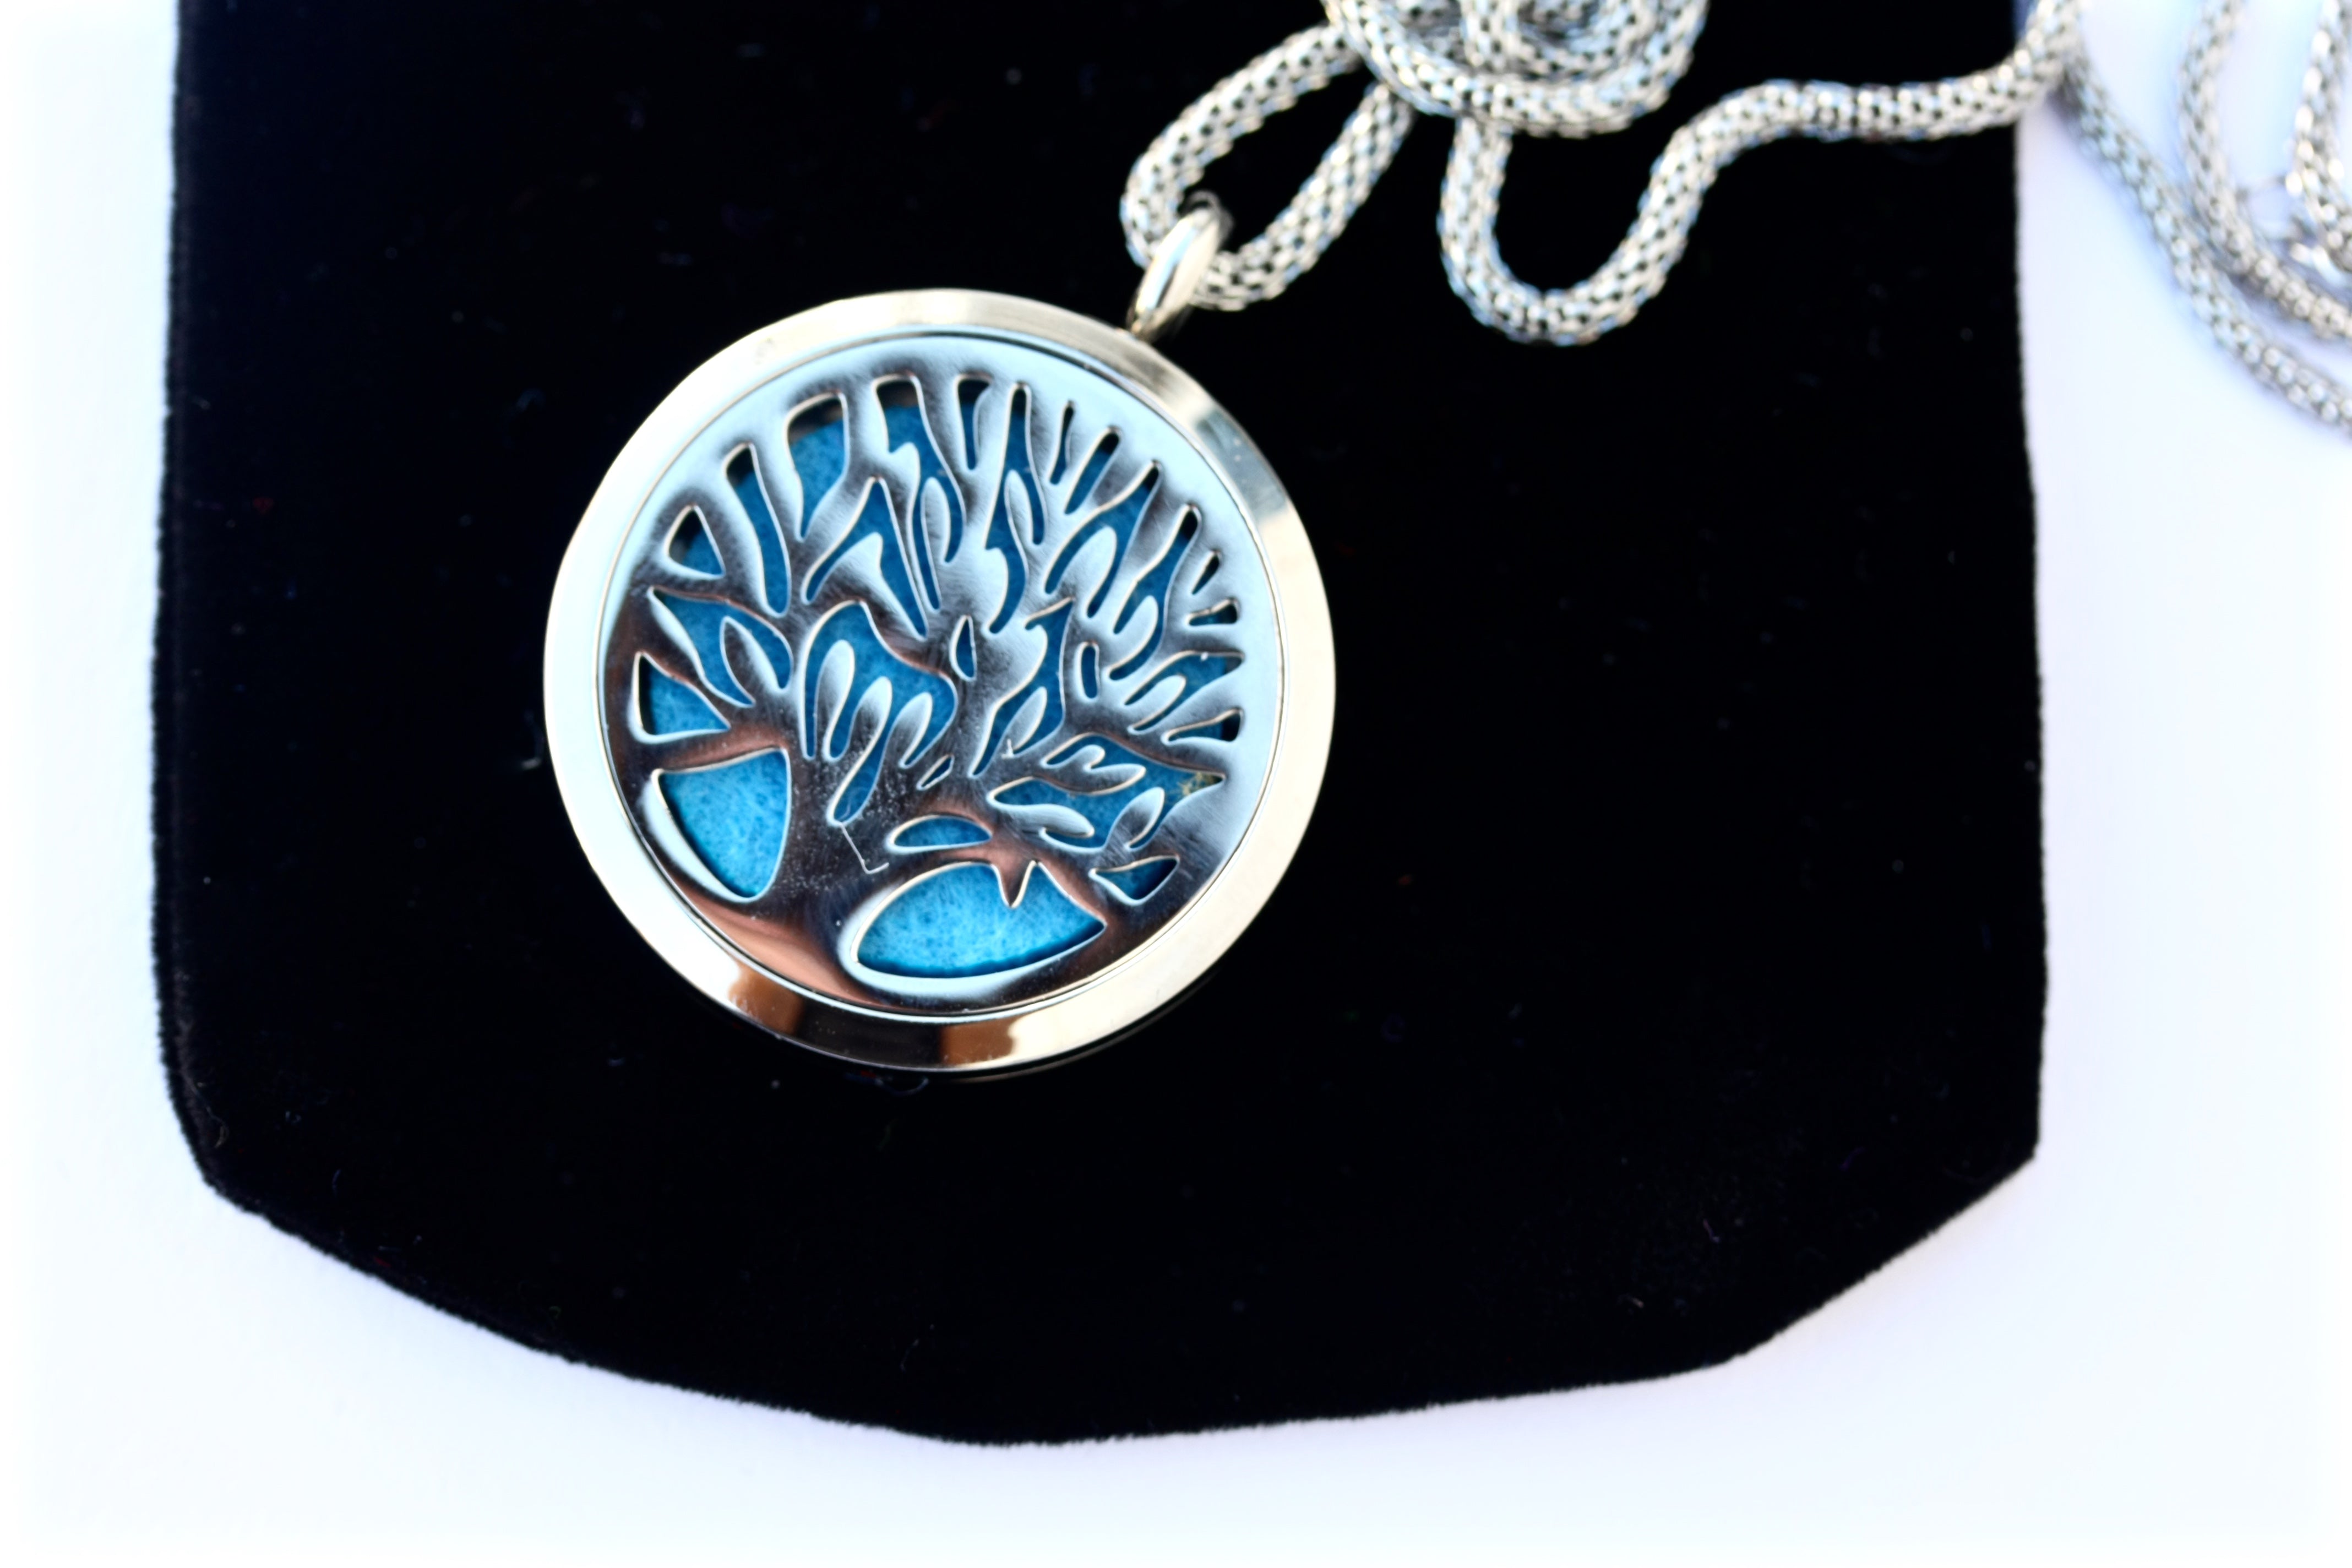 Benefits of Essential Oils with a Tree of Life Diffuser Necklace